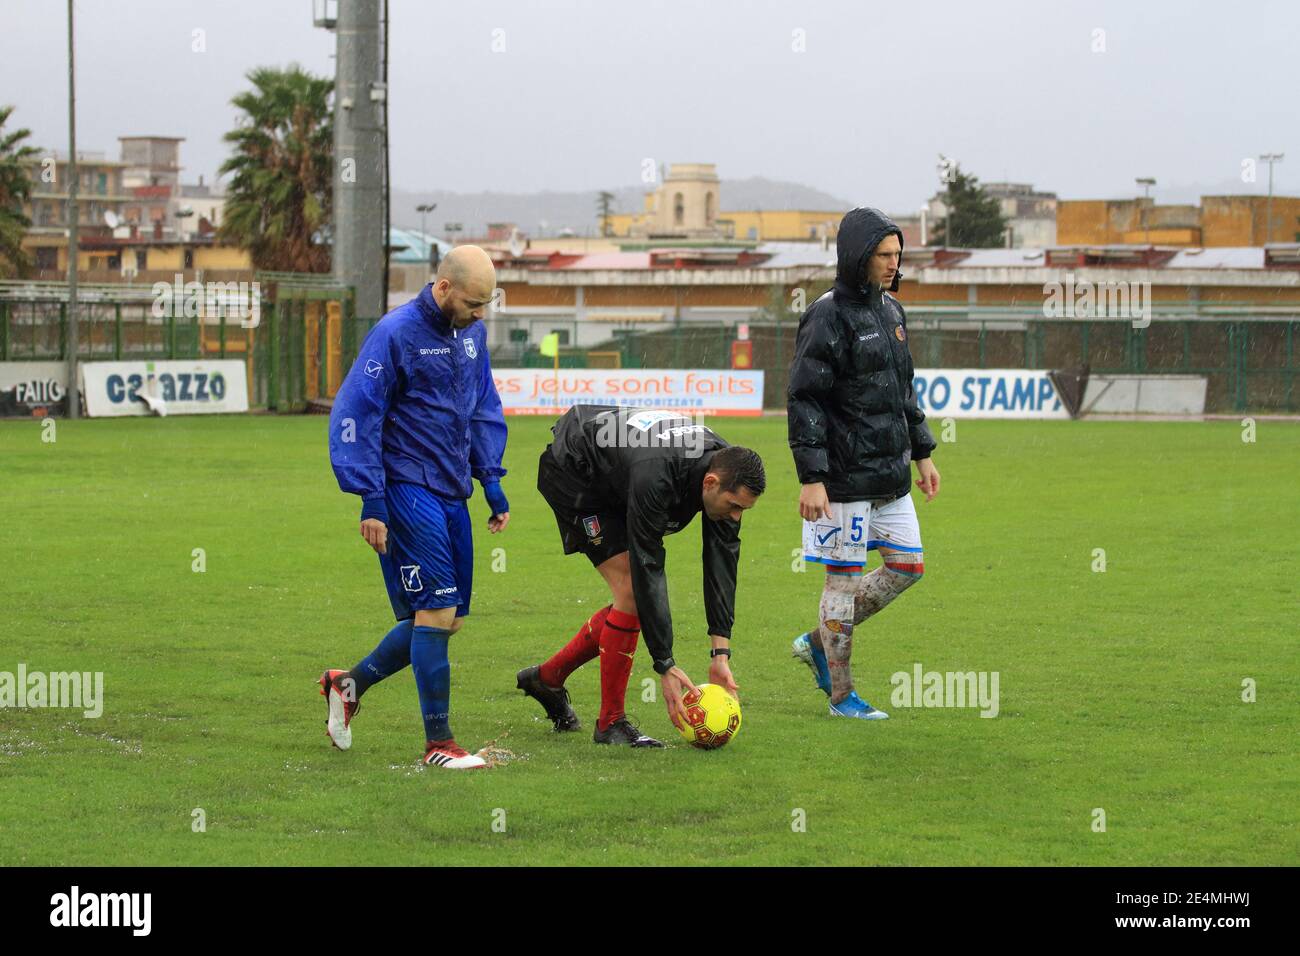 Pagani, Italy. 24th Jan, 2021. Serie C Italian Championship, Girone C Pro League football match between Paganese and Catania, 20th day of the championship. At the third inspection, the referee Andrea Colombo of Como has taken the decision to postpone the match of Pagani to a date to be set, considering impracticable conditions of the playing field, hit by an abundant rain in the last hours. (Photo by Pasquale Senatore/Pacific Press) Credit: Pacific Press Media Production Corp./Alamy Live News Stock Photo